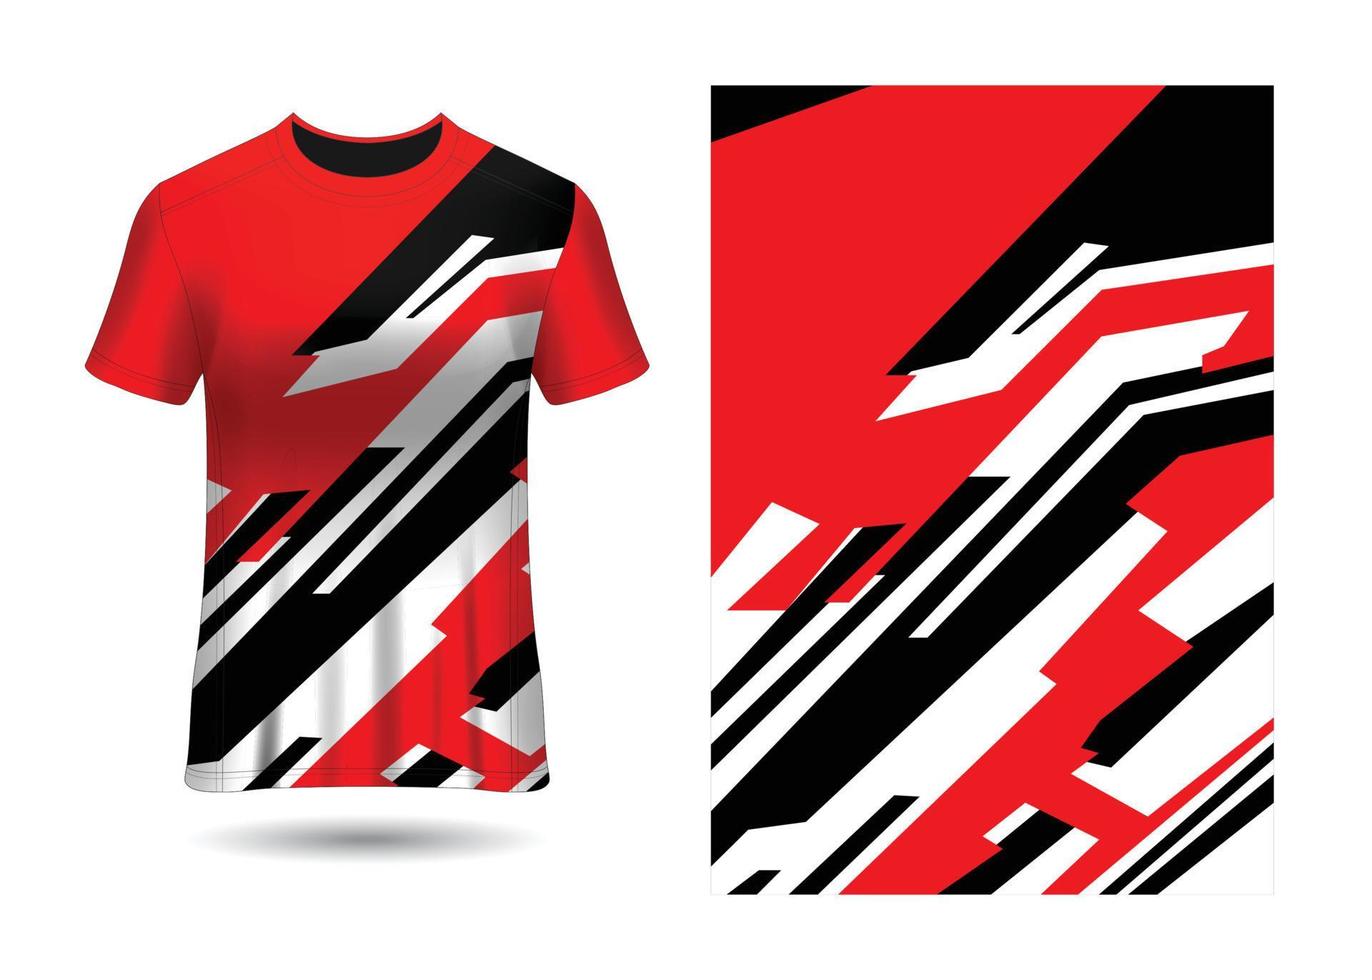 Abstract Background for Sport Jersey Vector